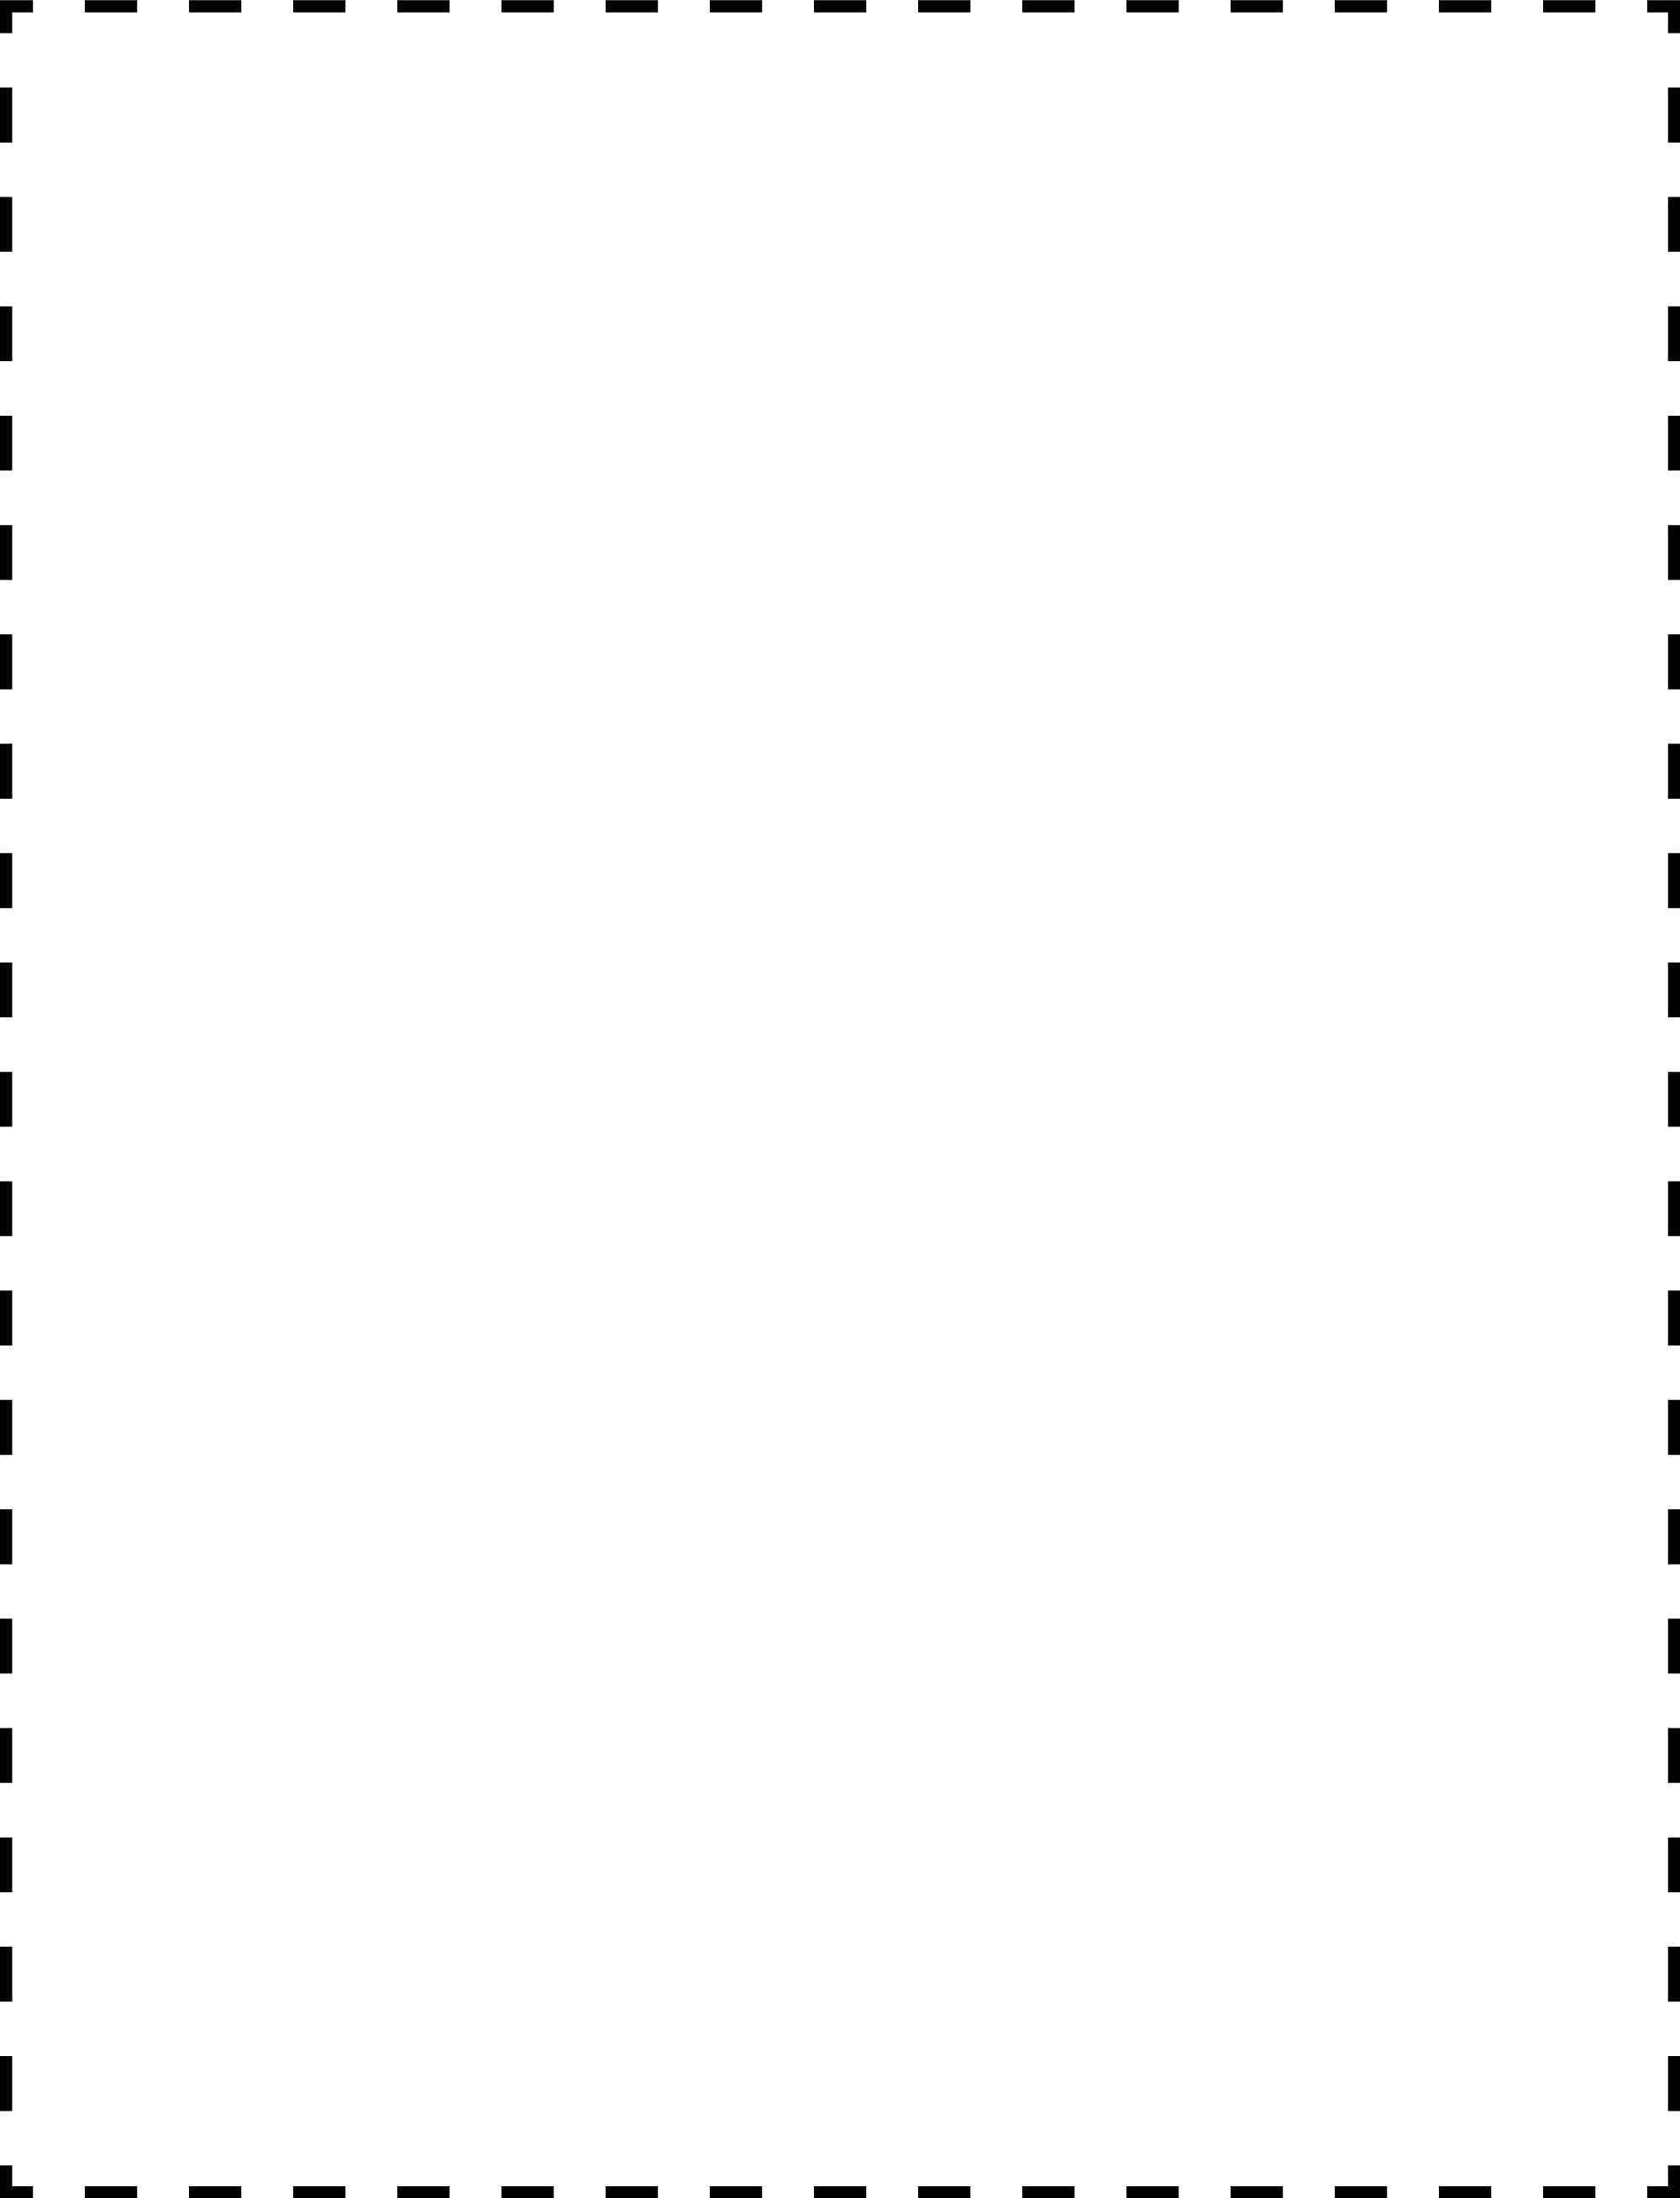 2520-coupon-outline-4x5-k.png